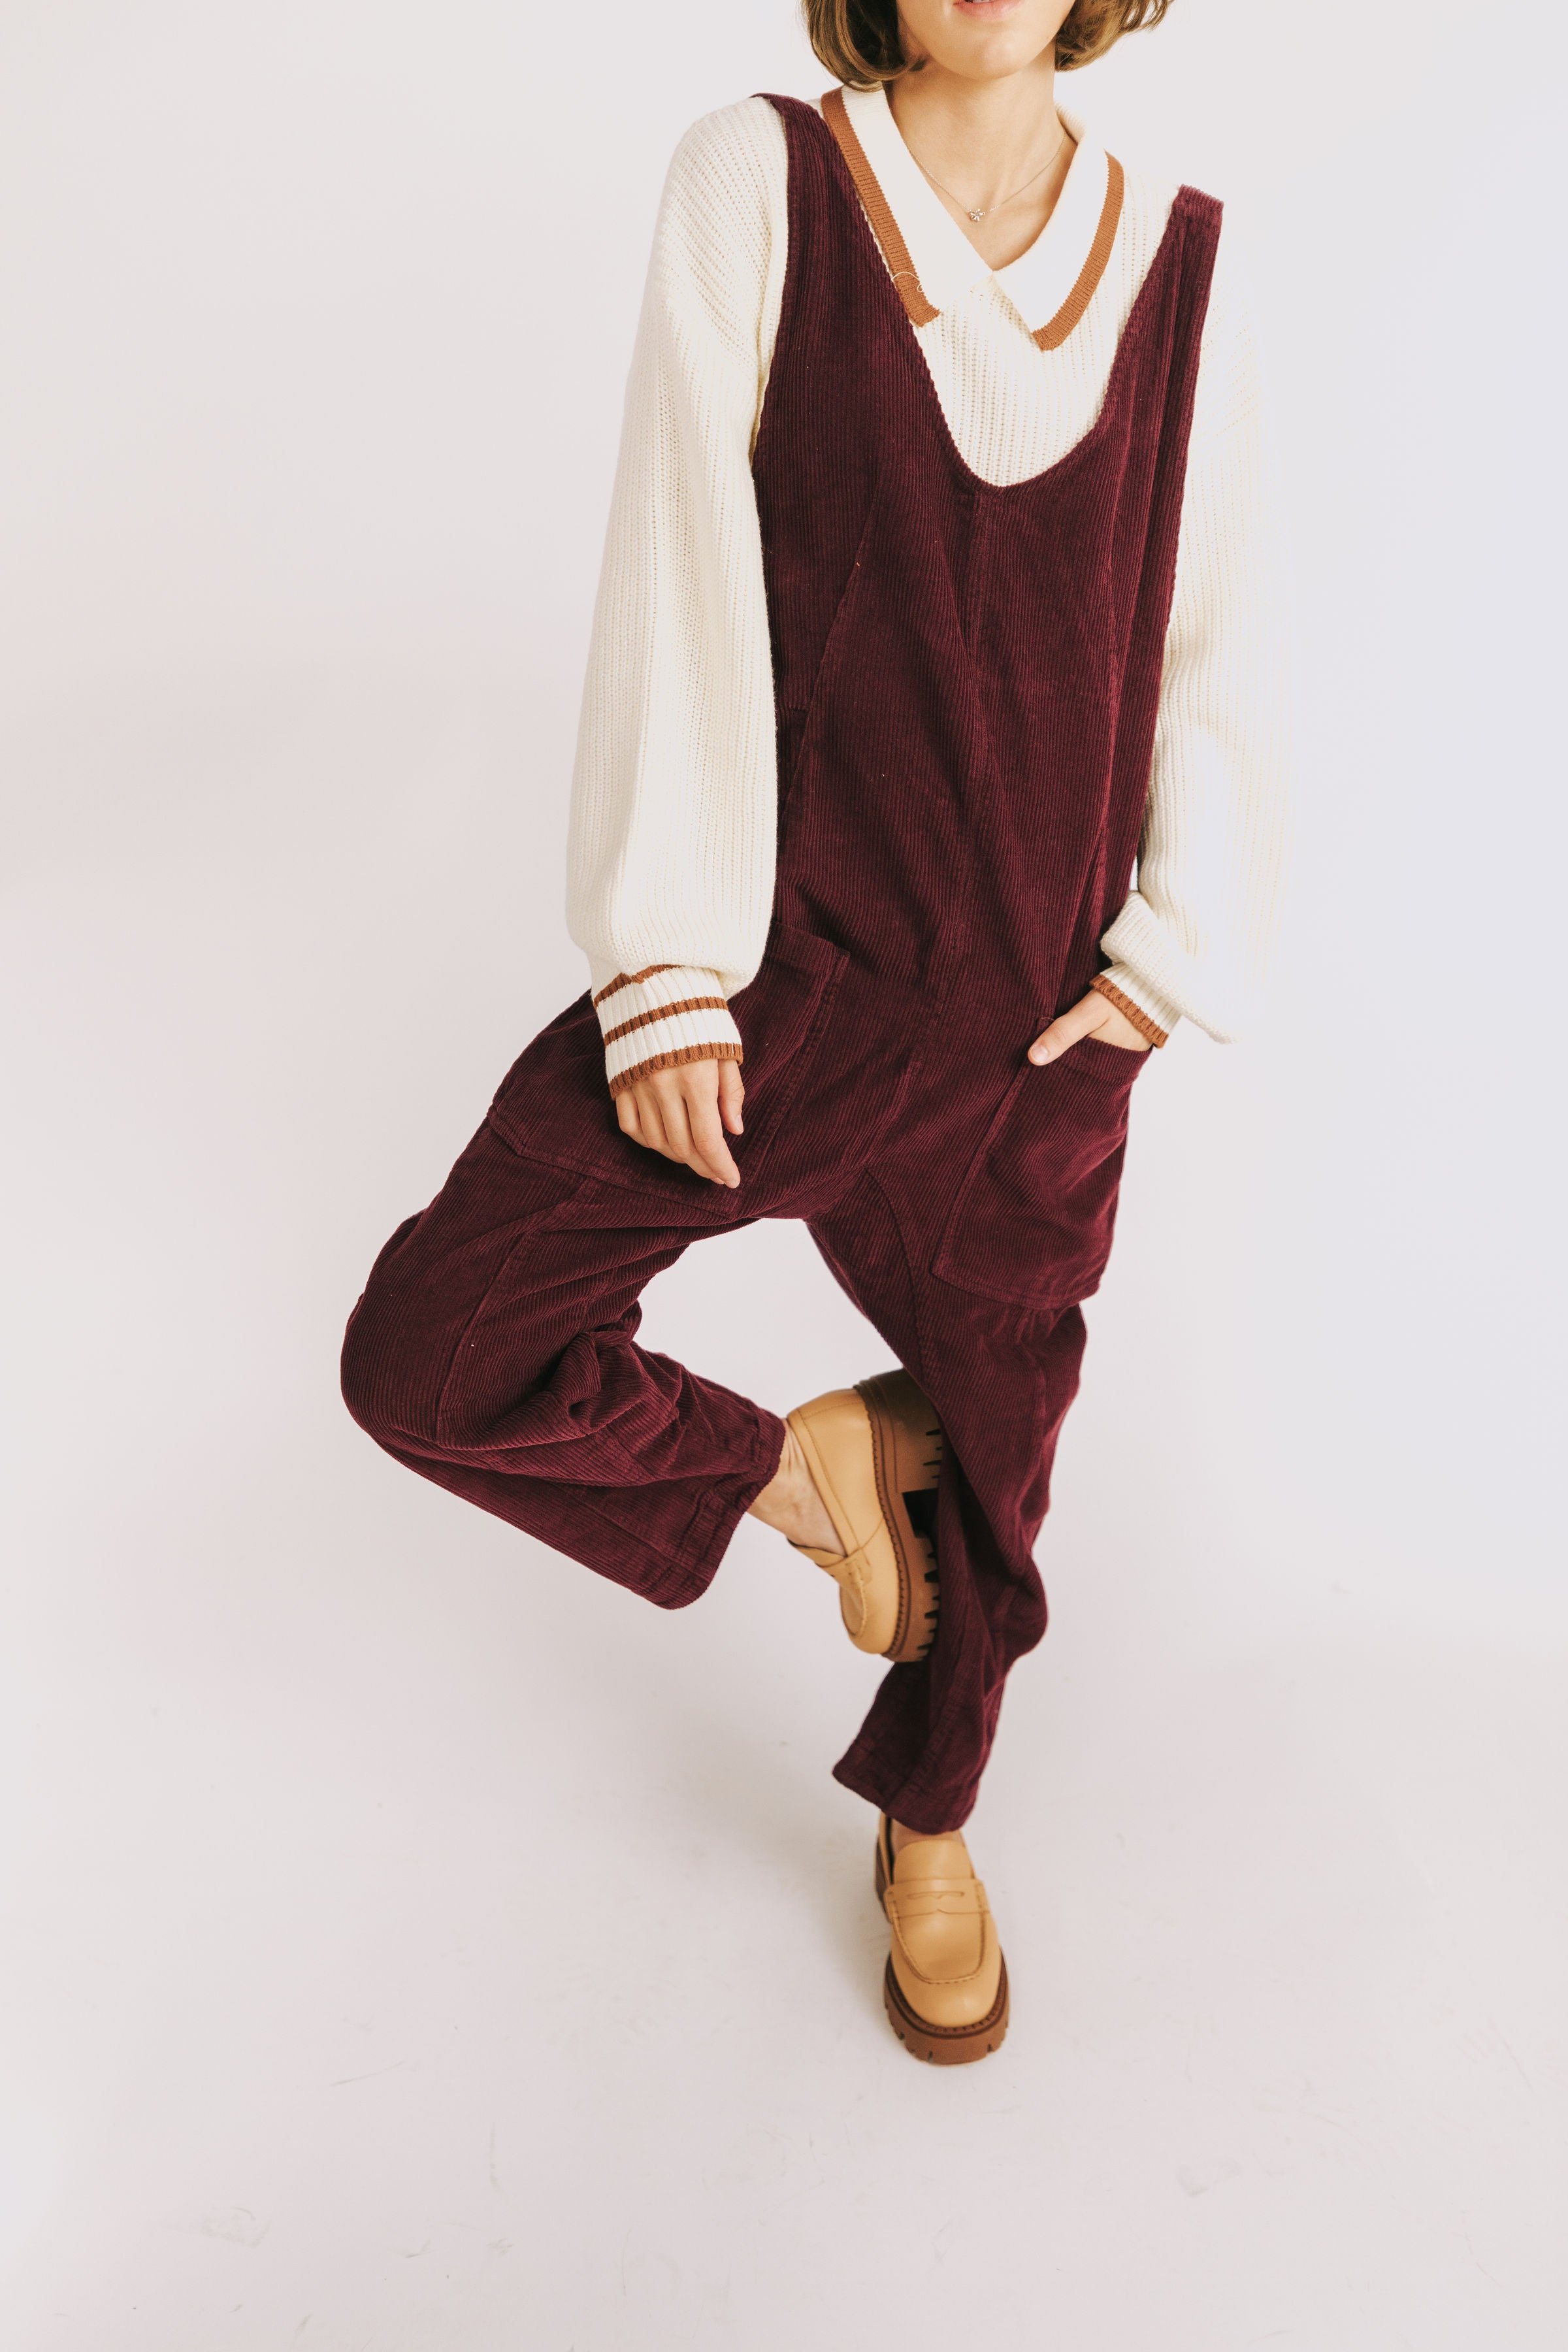 FREE PEOPLE - High Roller Cord Jumpsuit